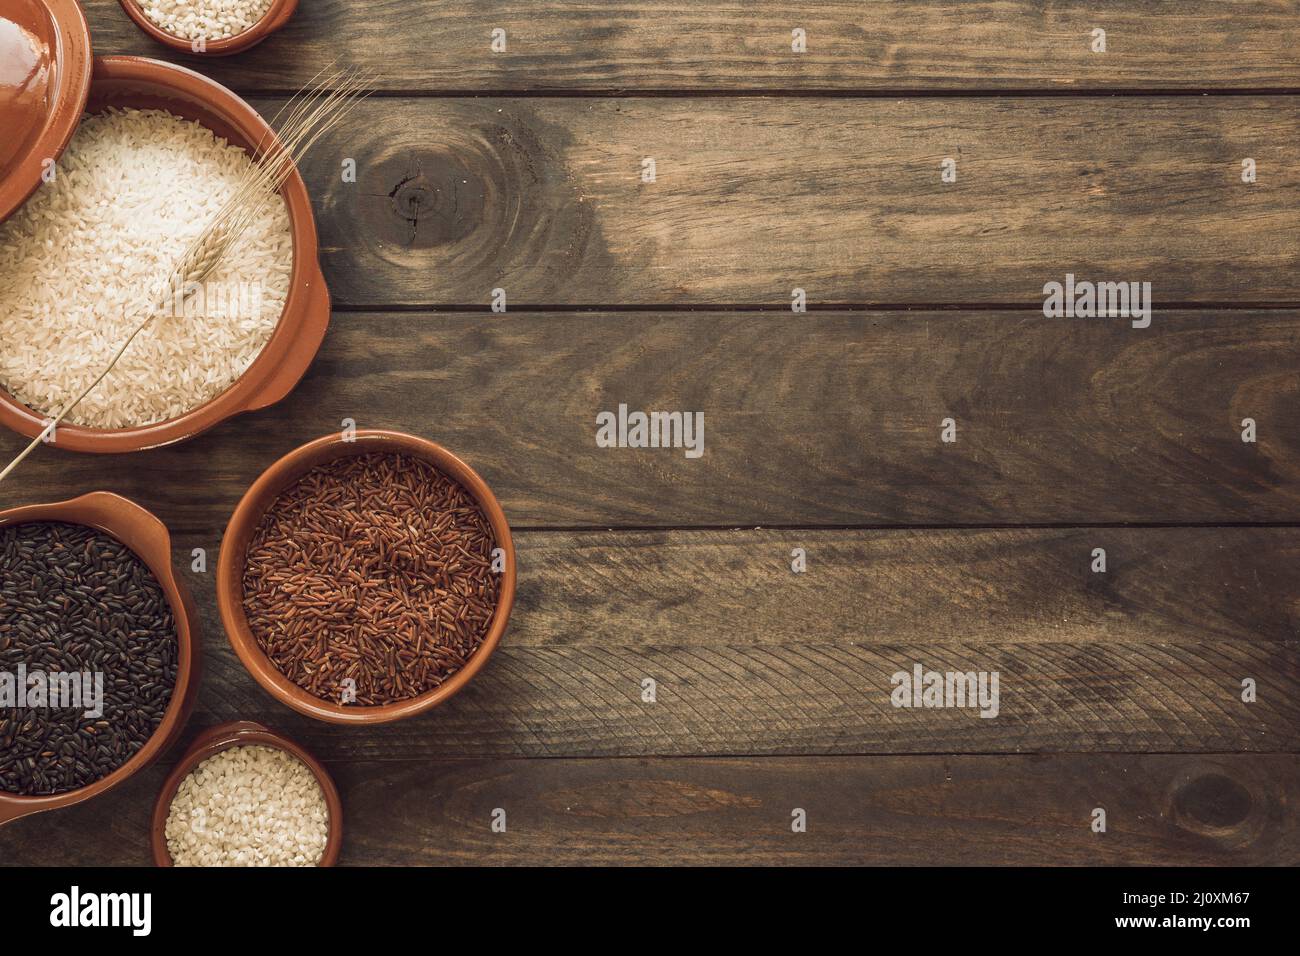 Overhead view red brown white rice bowls wooden background. High quality beautiful photo concept Stock Photo